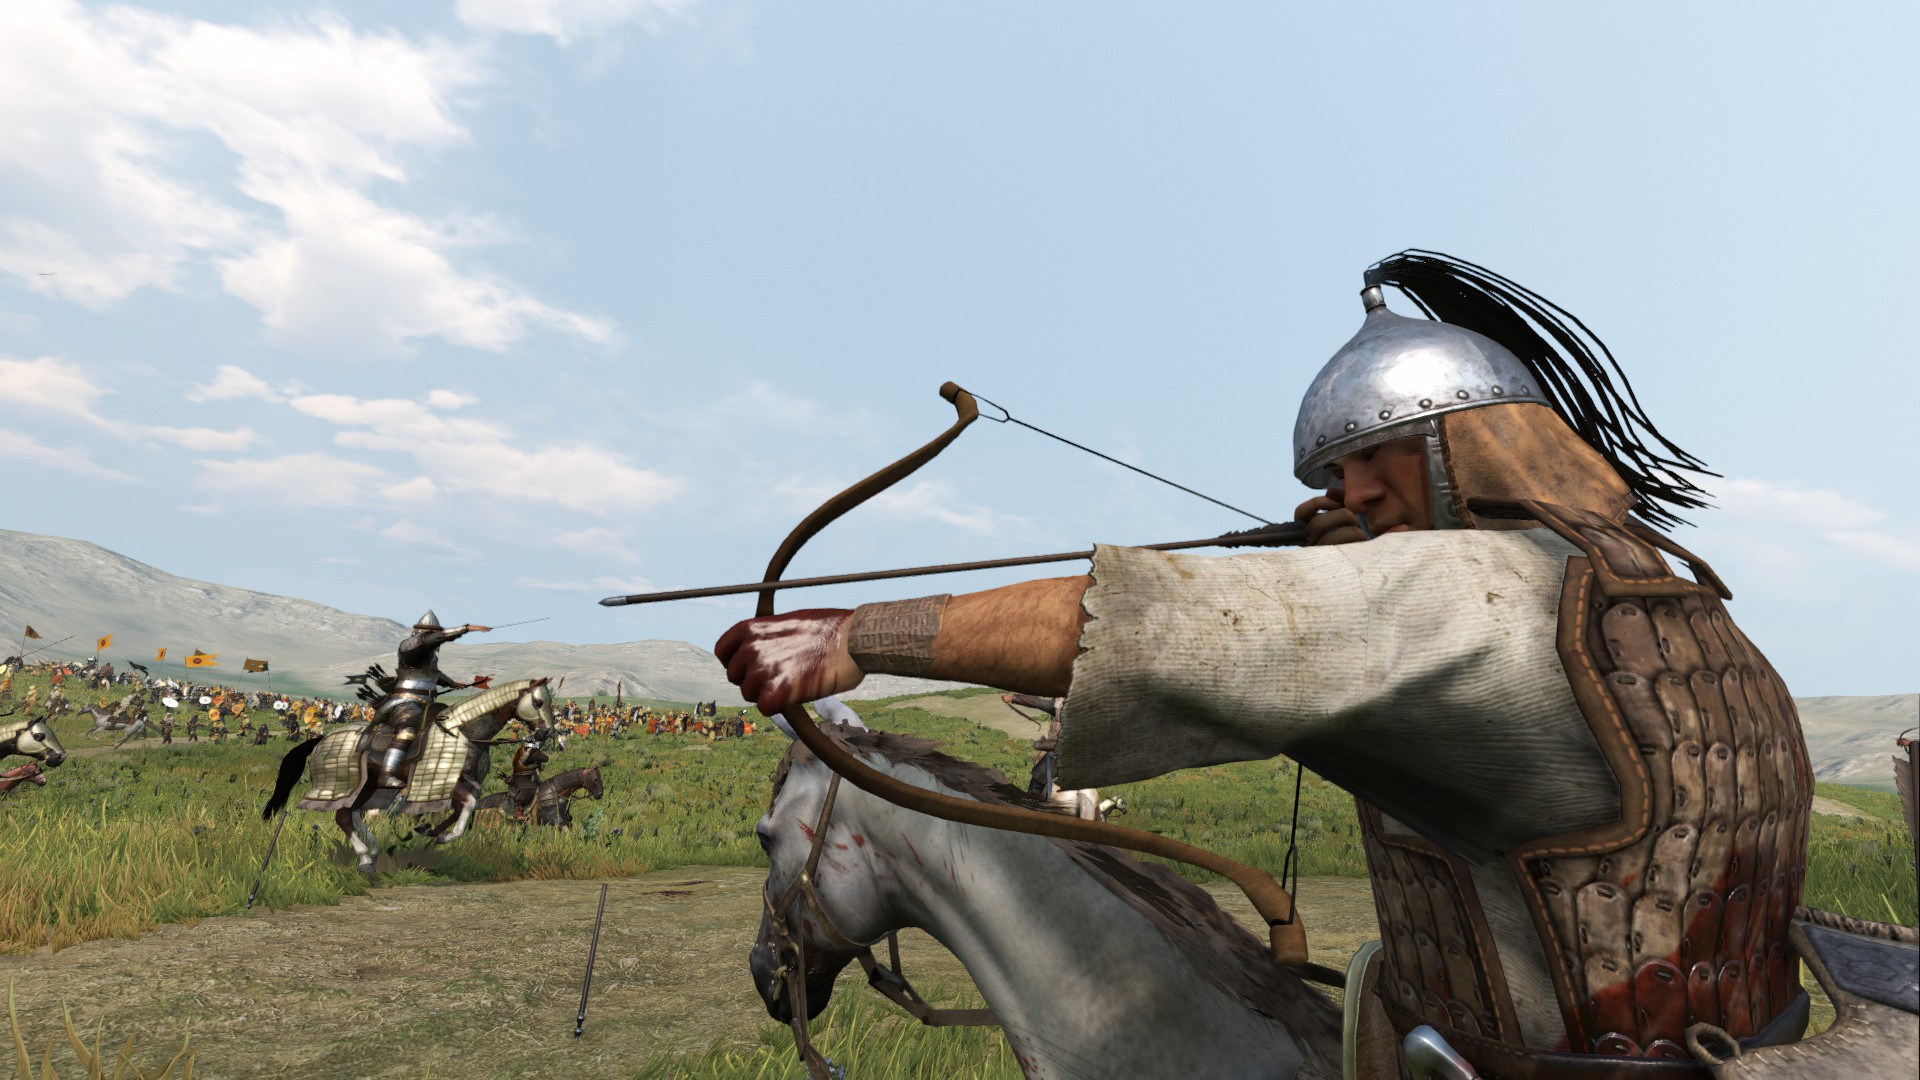 Warband bannerlord. Mount and Blade 2. Mount and Blade 2 1.2. Маунт блейд 2 баннерлорд. Mount & Blade II: Bannerlord атлетичность.